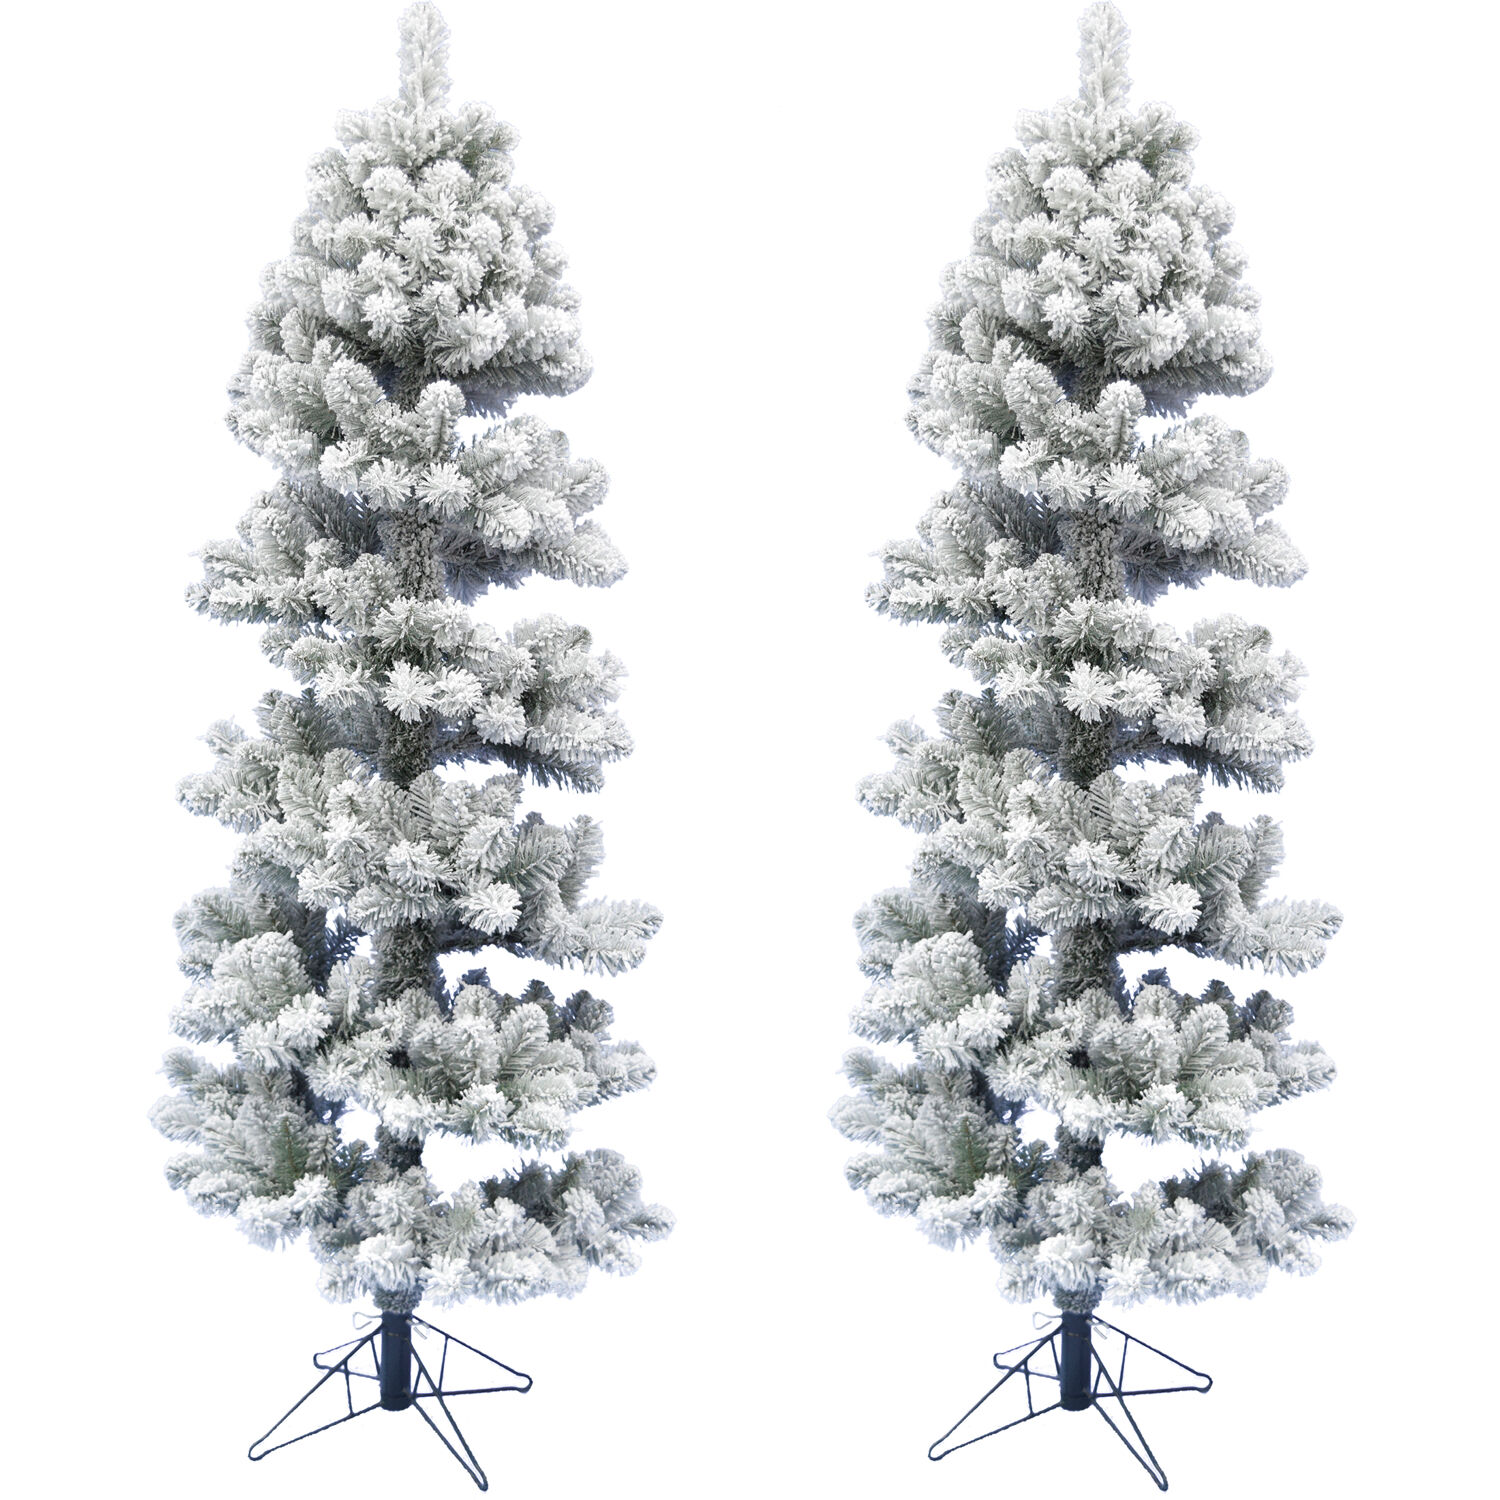 Fraser Hill Farm 5-Ft Set of 2 Snowy Spiral Porch Tree in Metal Base, No lights - image 1 of 5